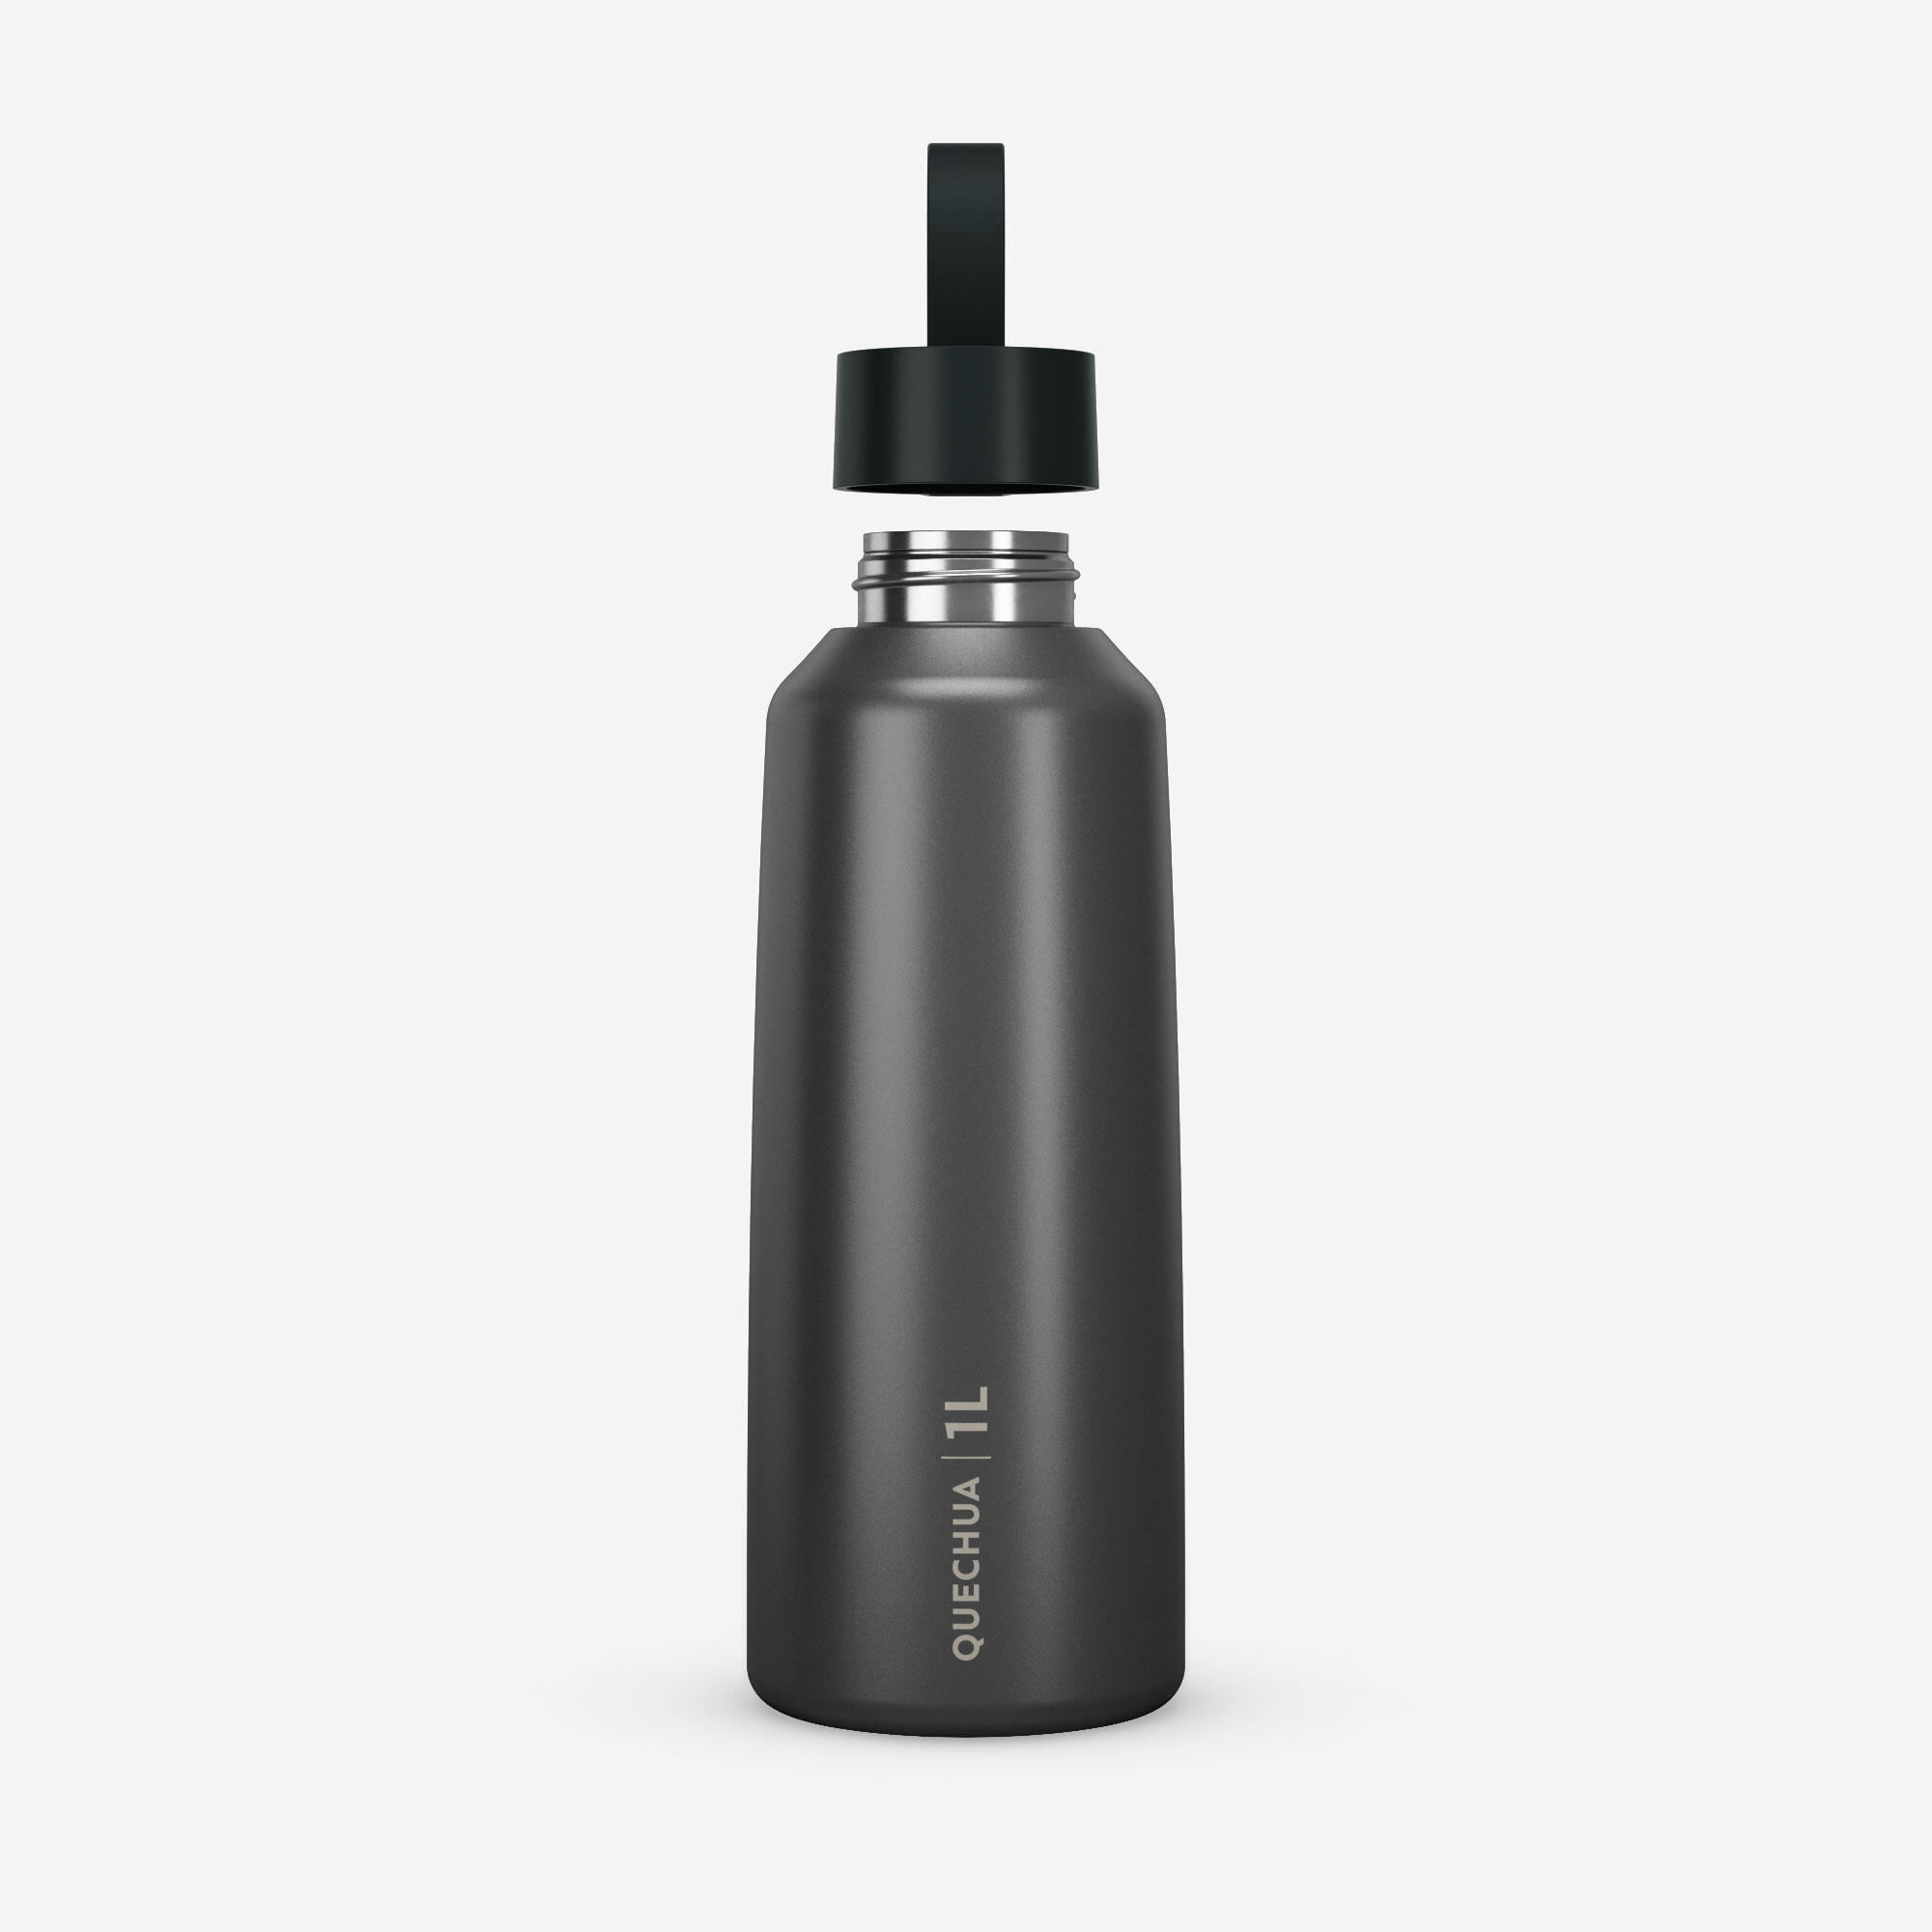 Stainless Steel Flask 1 L with screw cap for hiking - Grey 8/10